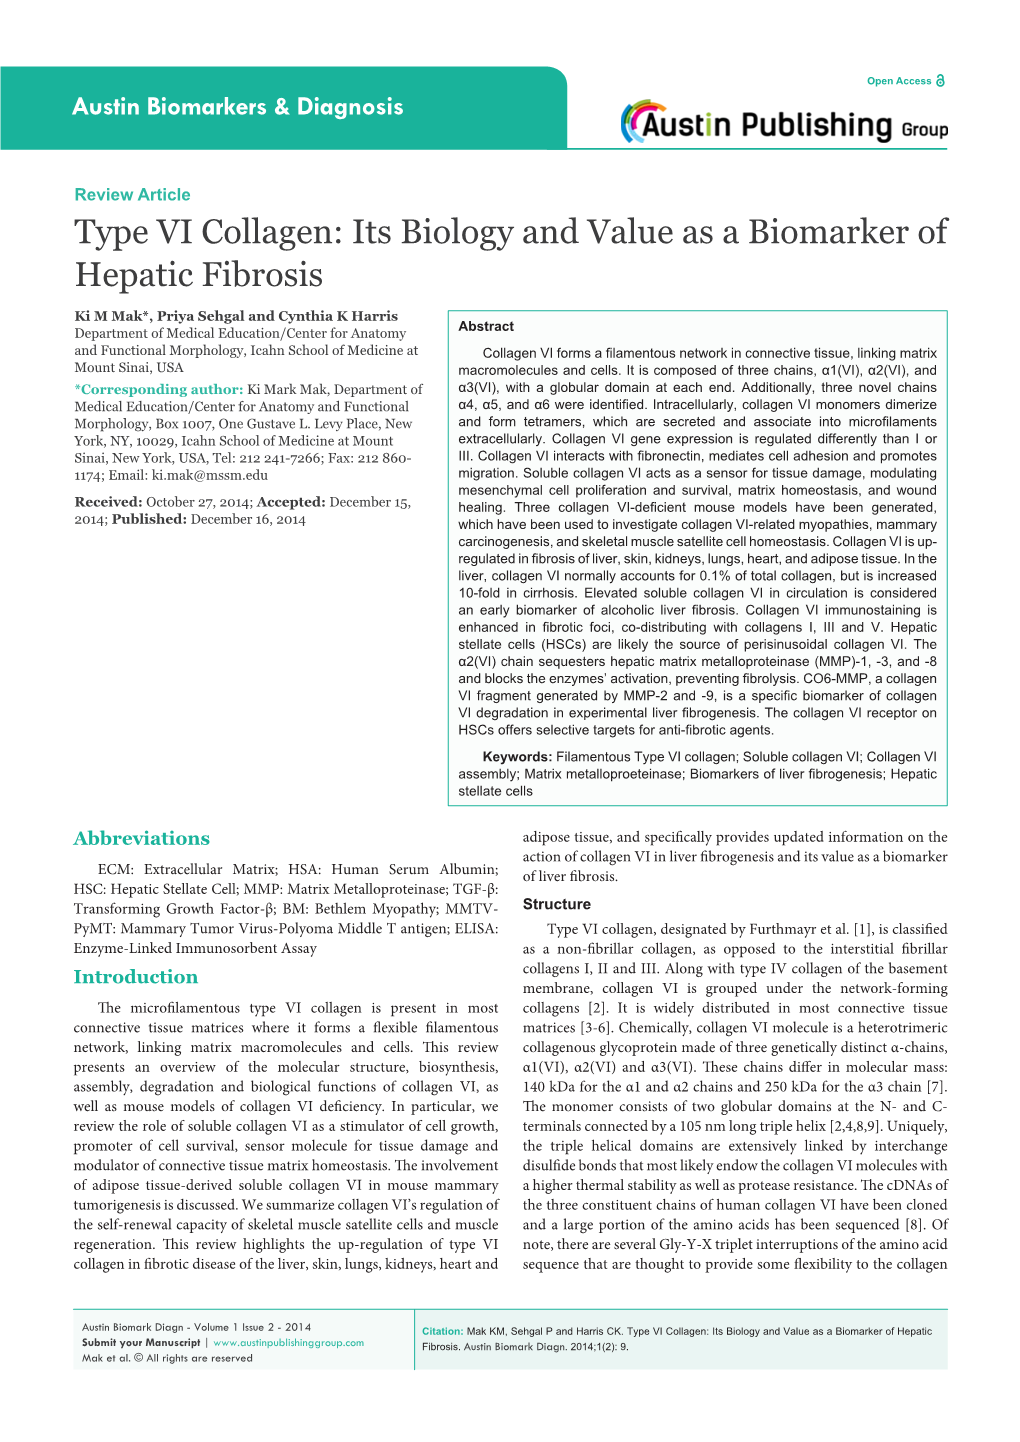 Type VI Collagen: Its Biology and Value As a Biomarker of Hepatic Fibrosis